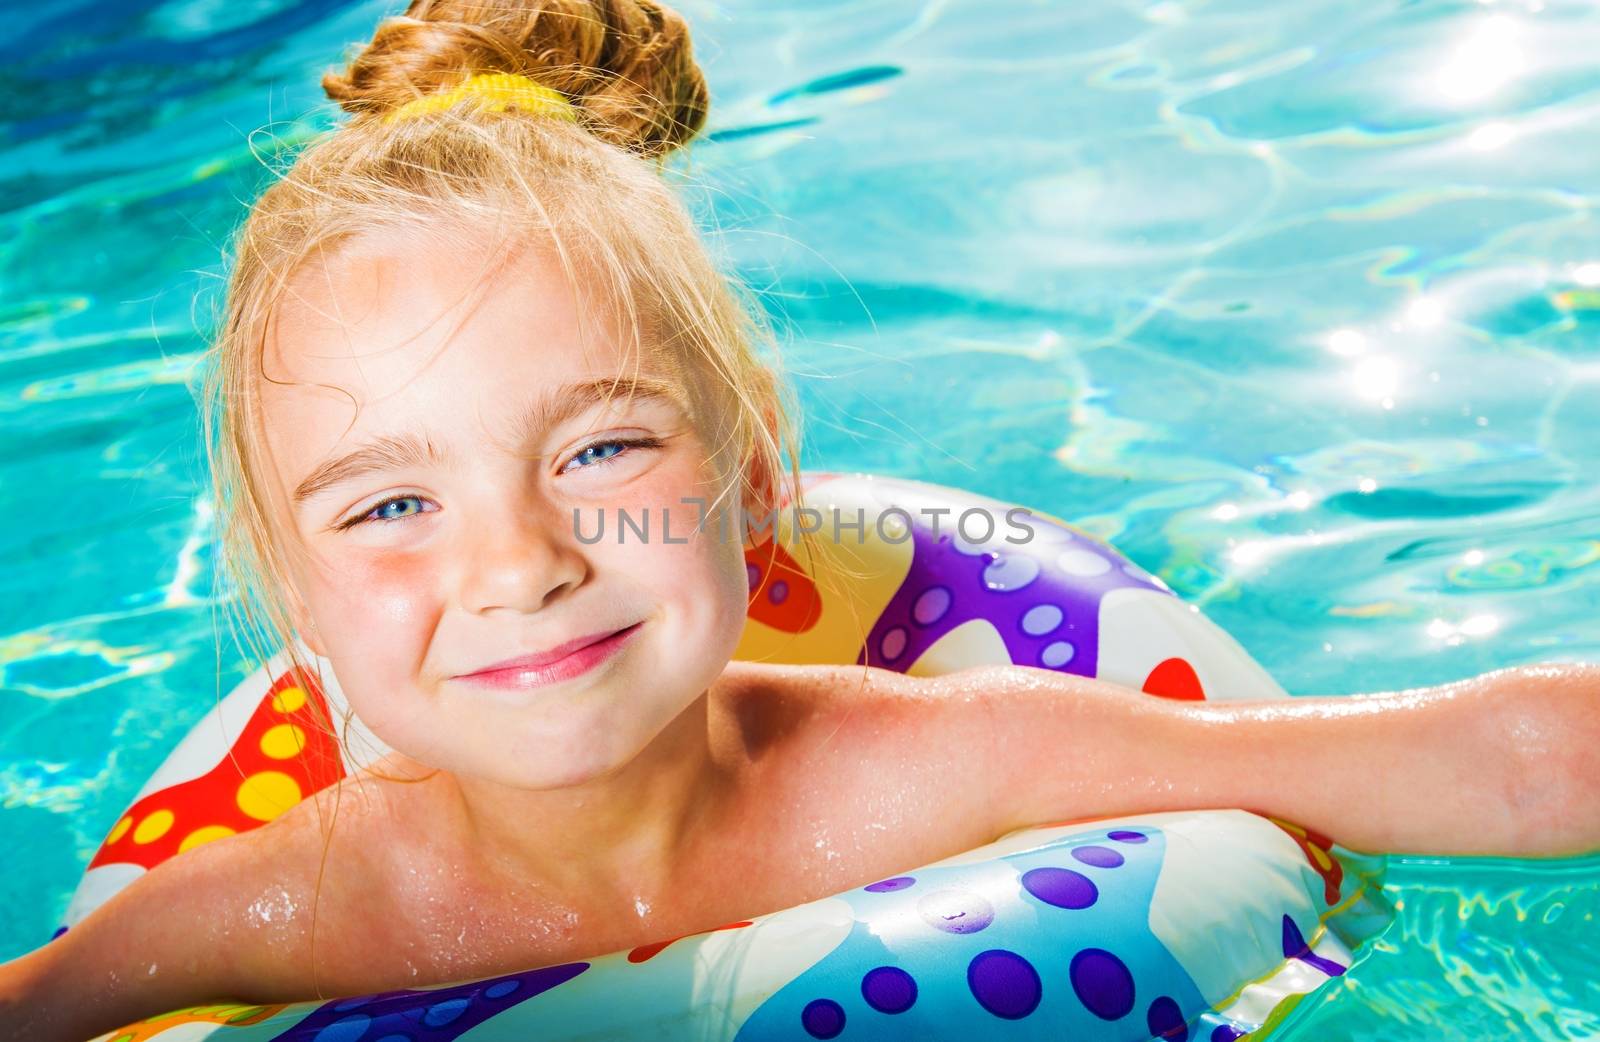 Summer Water Fun. Caucasian Girl in the Swimming Pool Learning How To Swim. Summertime Pool Time.